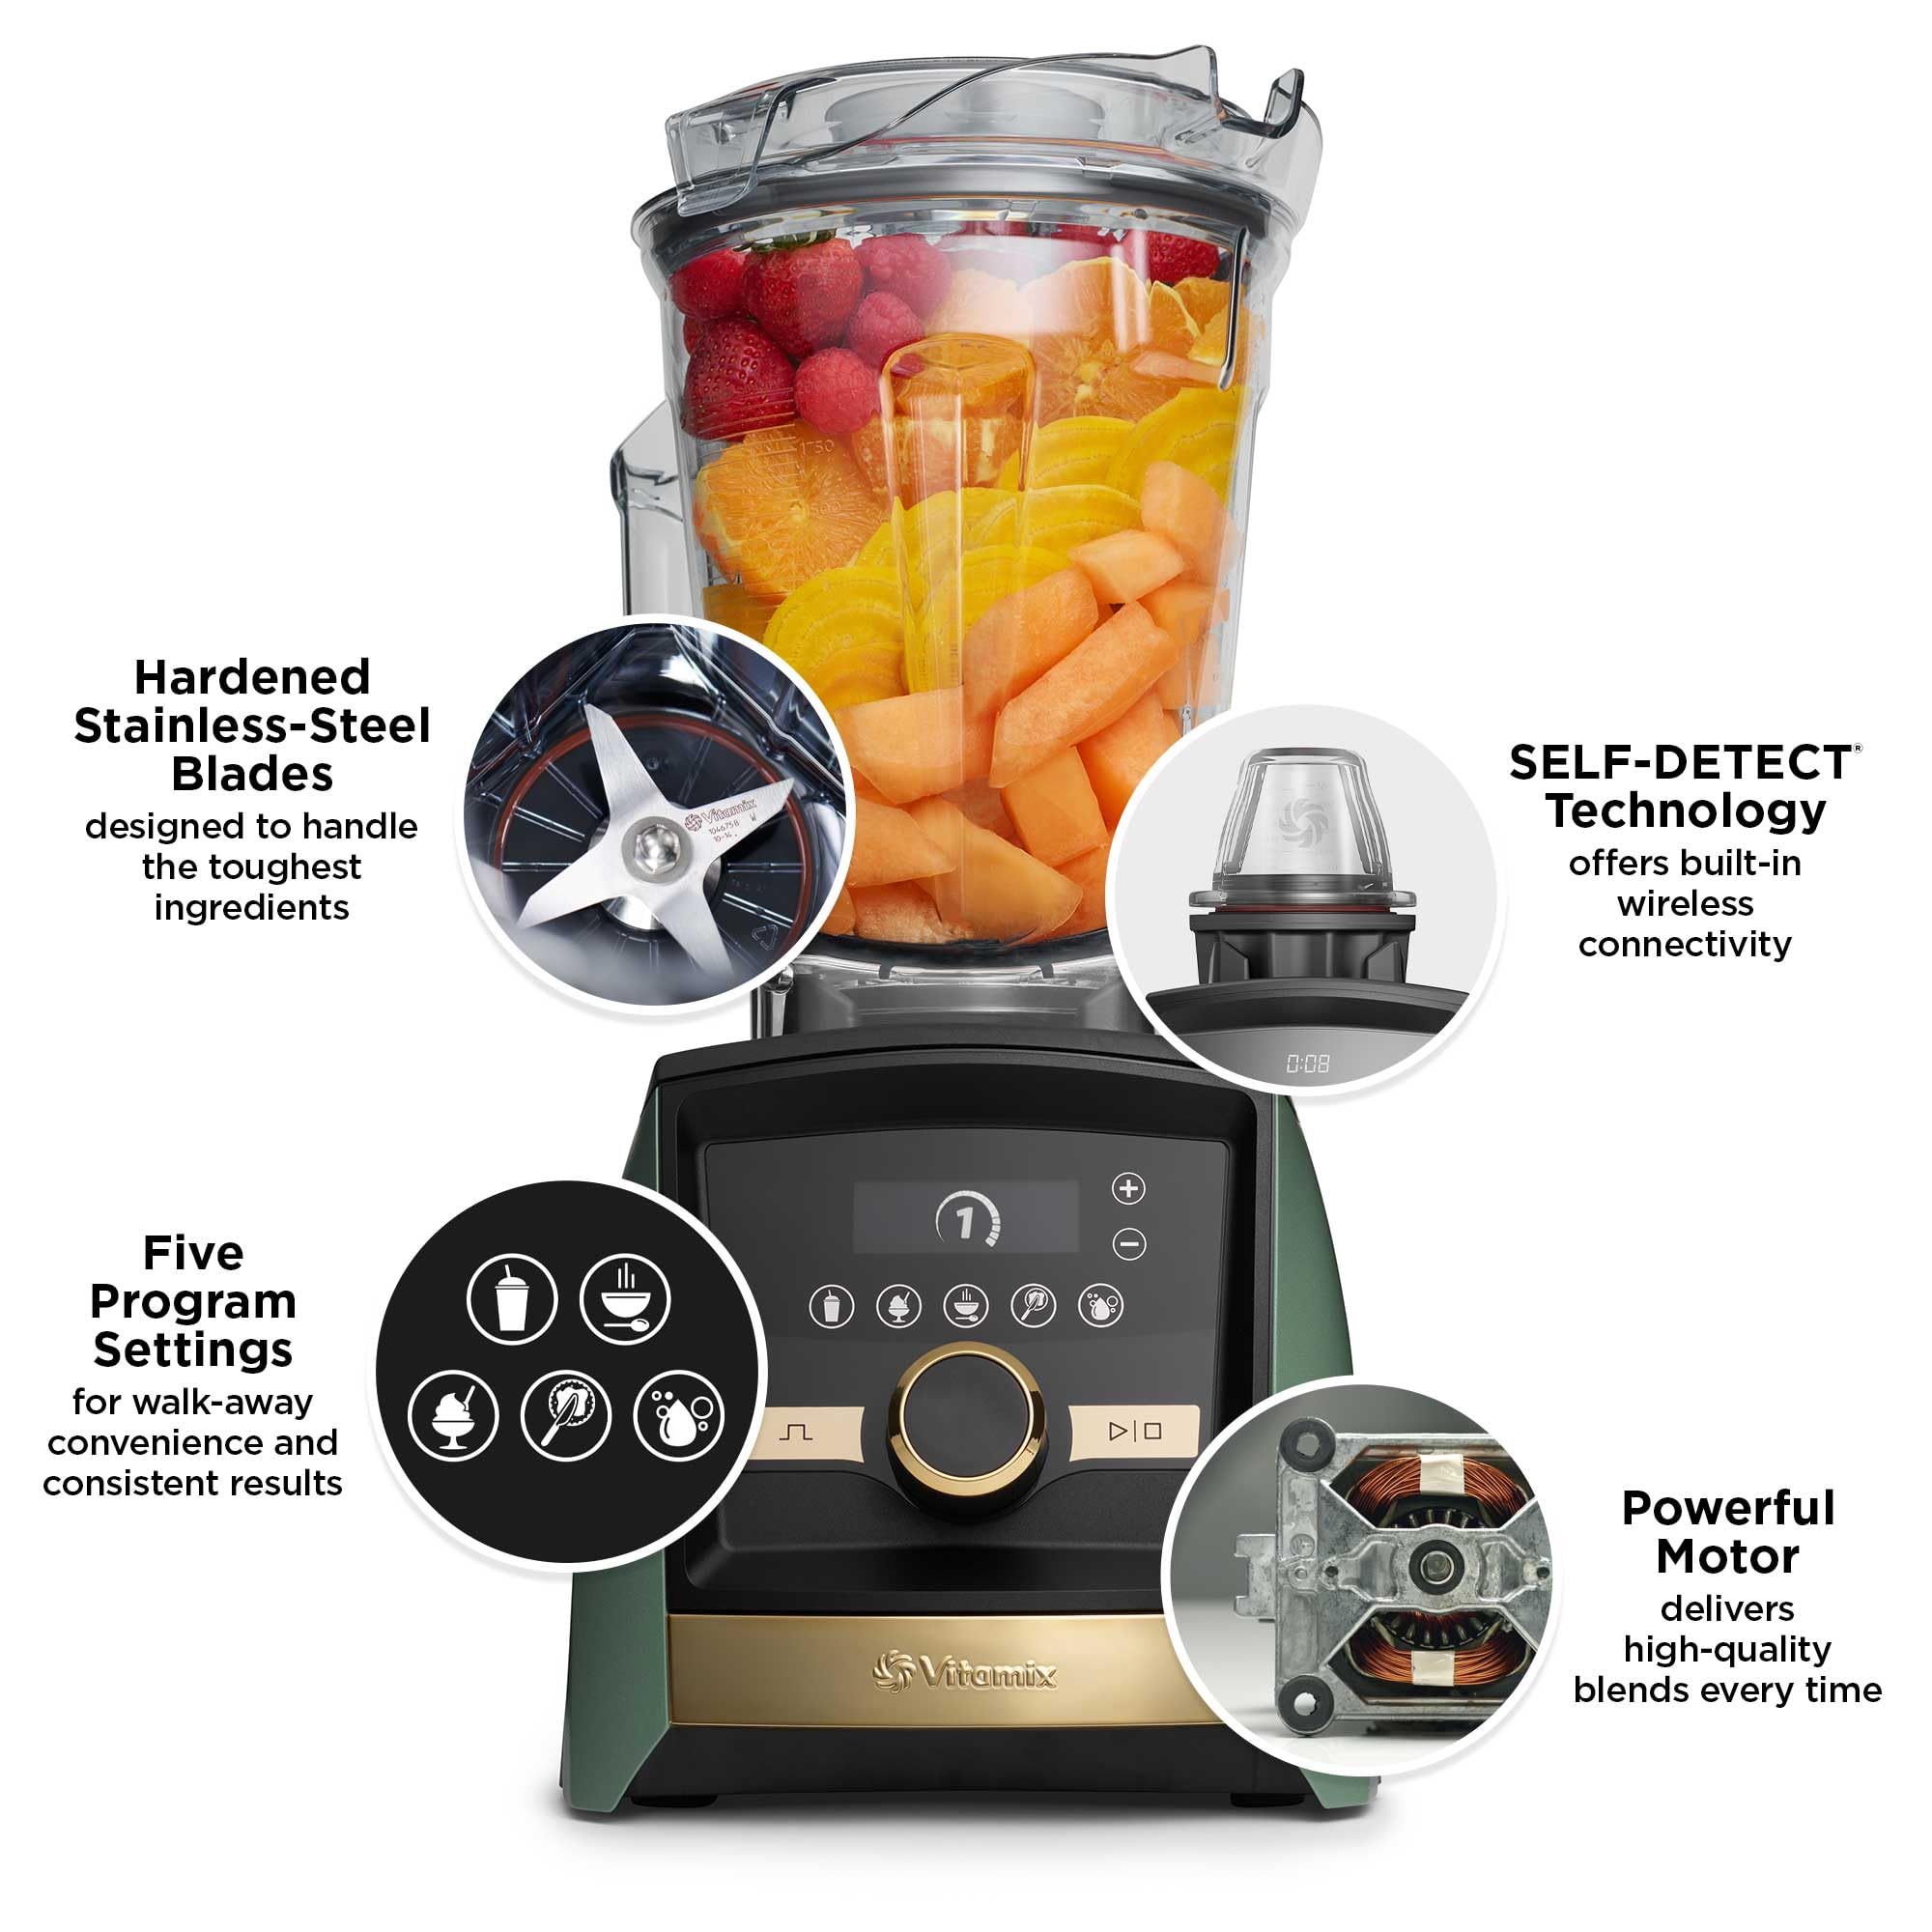 Vitamix A3500 Ascent Series Smart Blender, Professional-Grade, 64 oz. Low-Profile Container, Matte Sage with Gold Accents